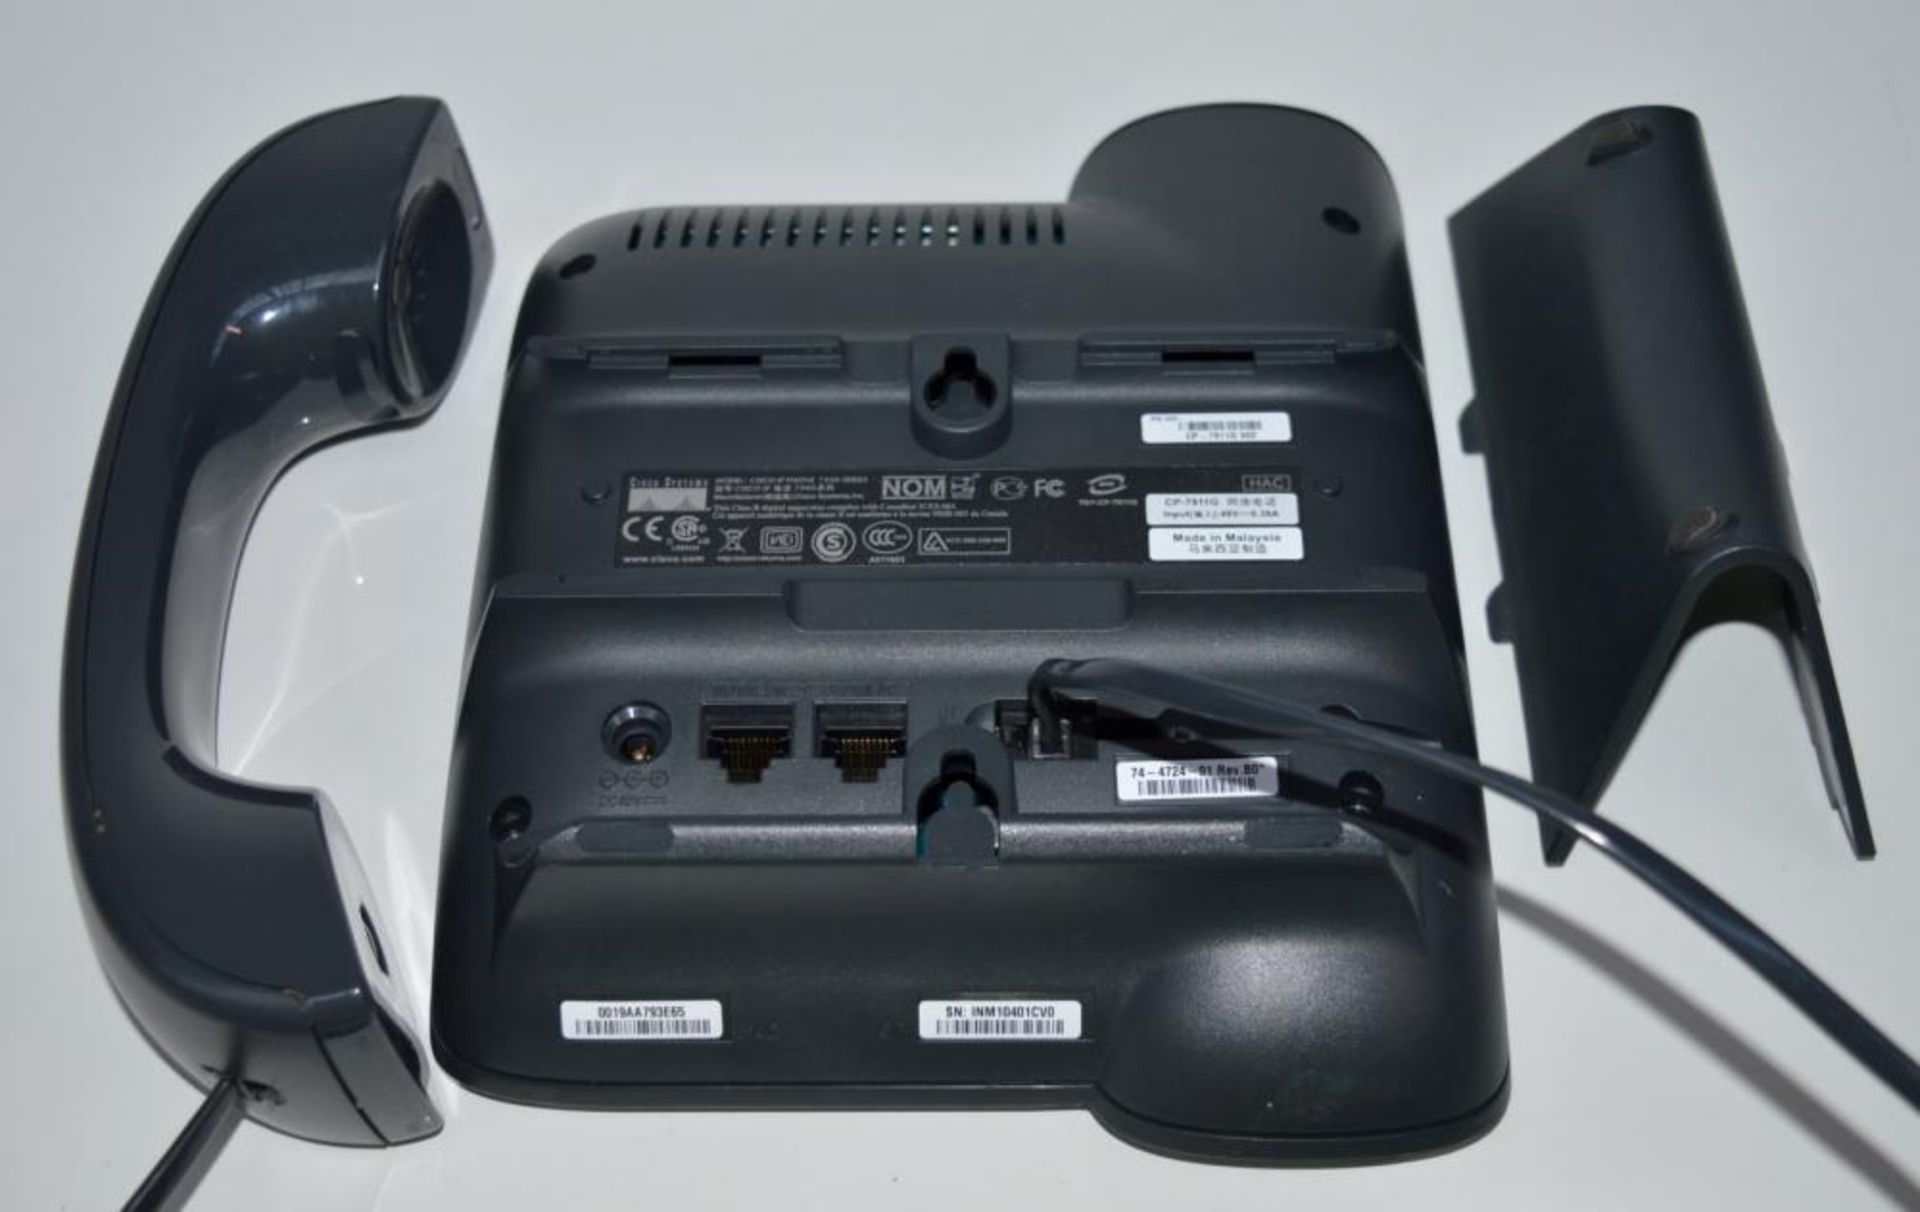 4 x Cisco CP-7911G Unified IP SIP Phones - Removed From a Working Office Environment in Good - Image 8 of 8